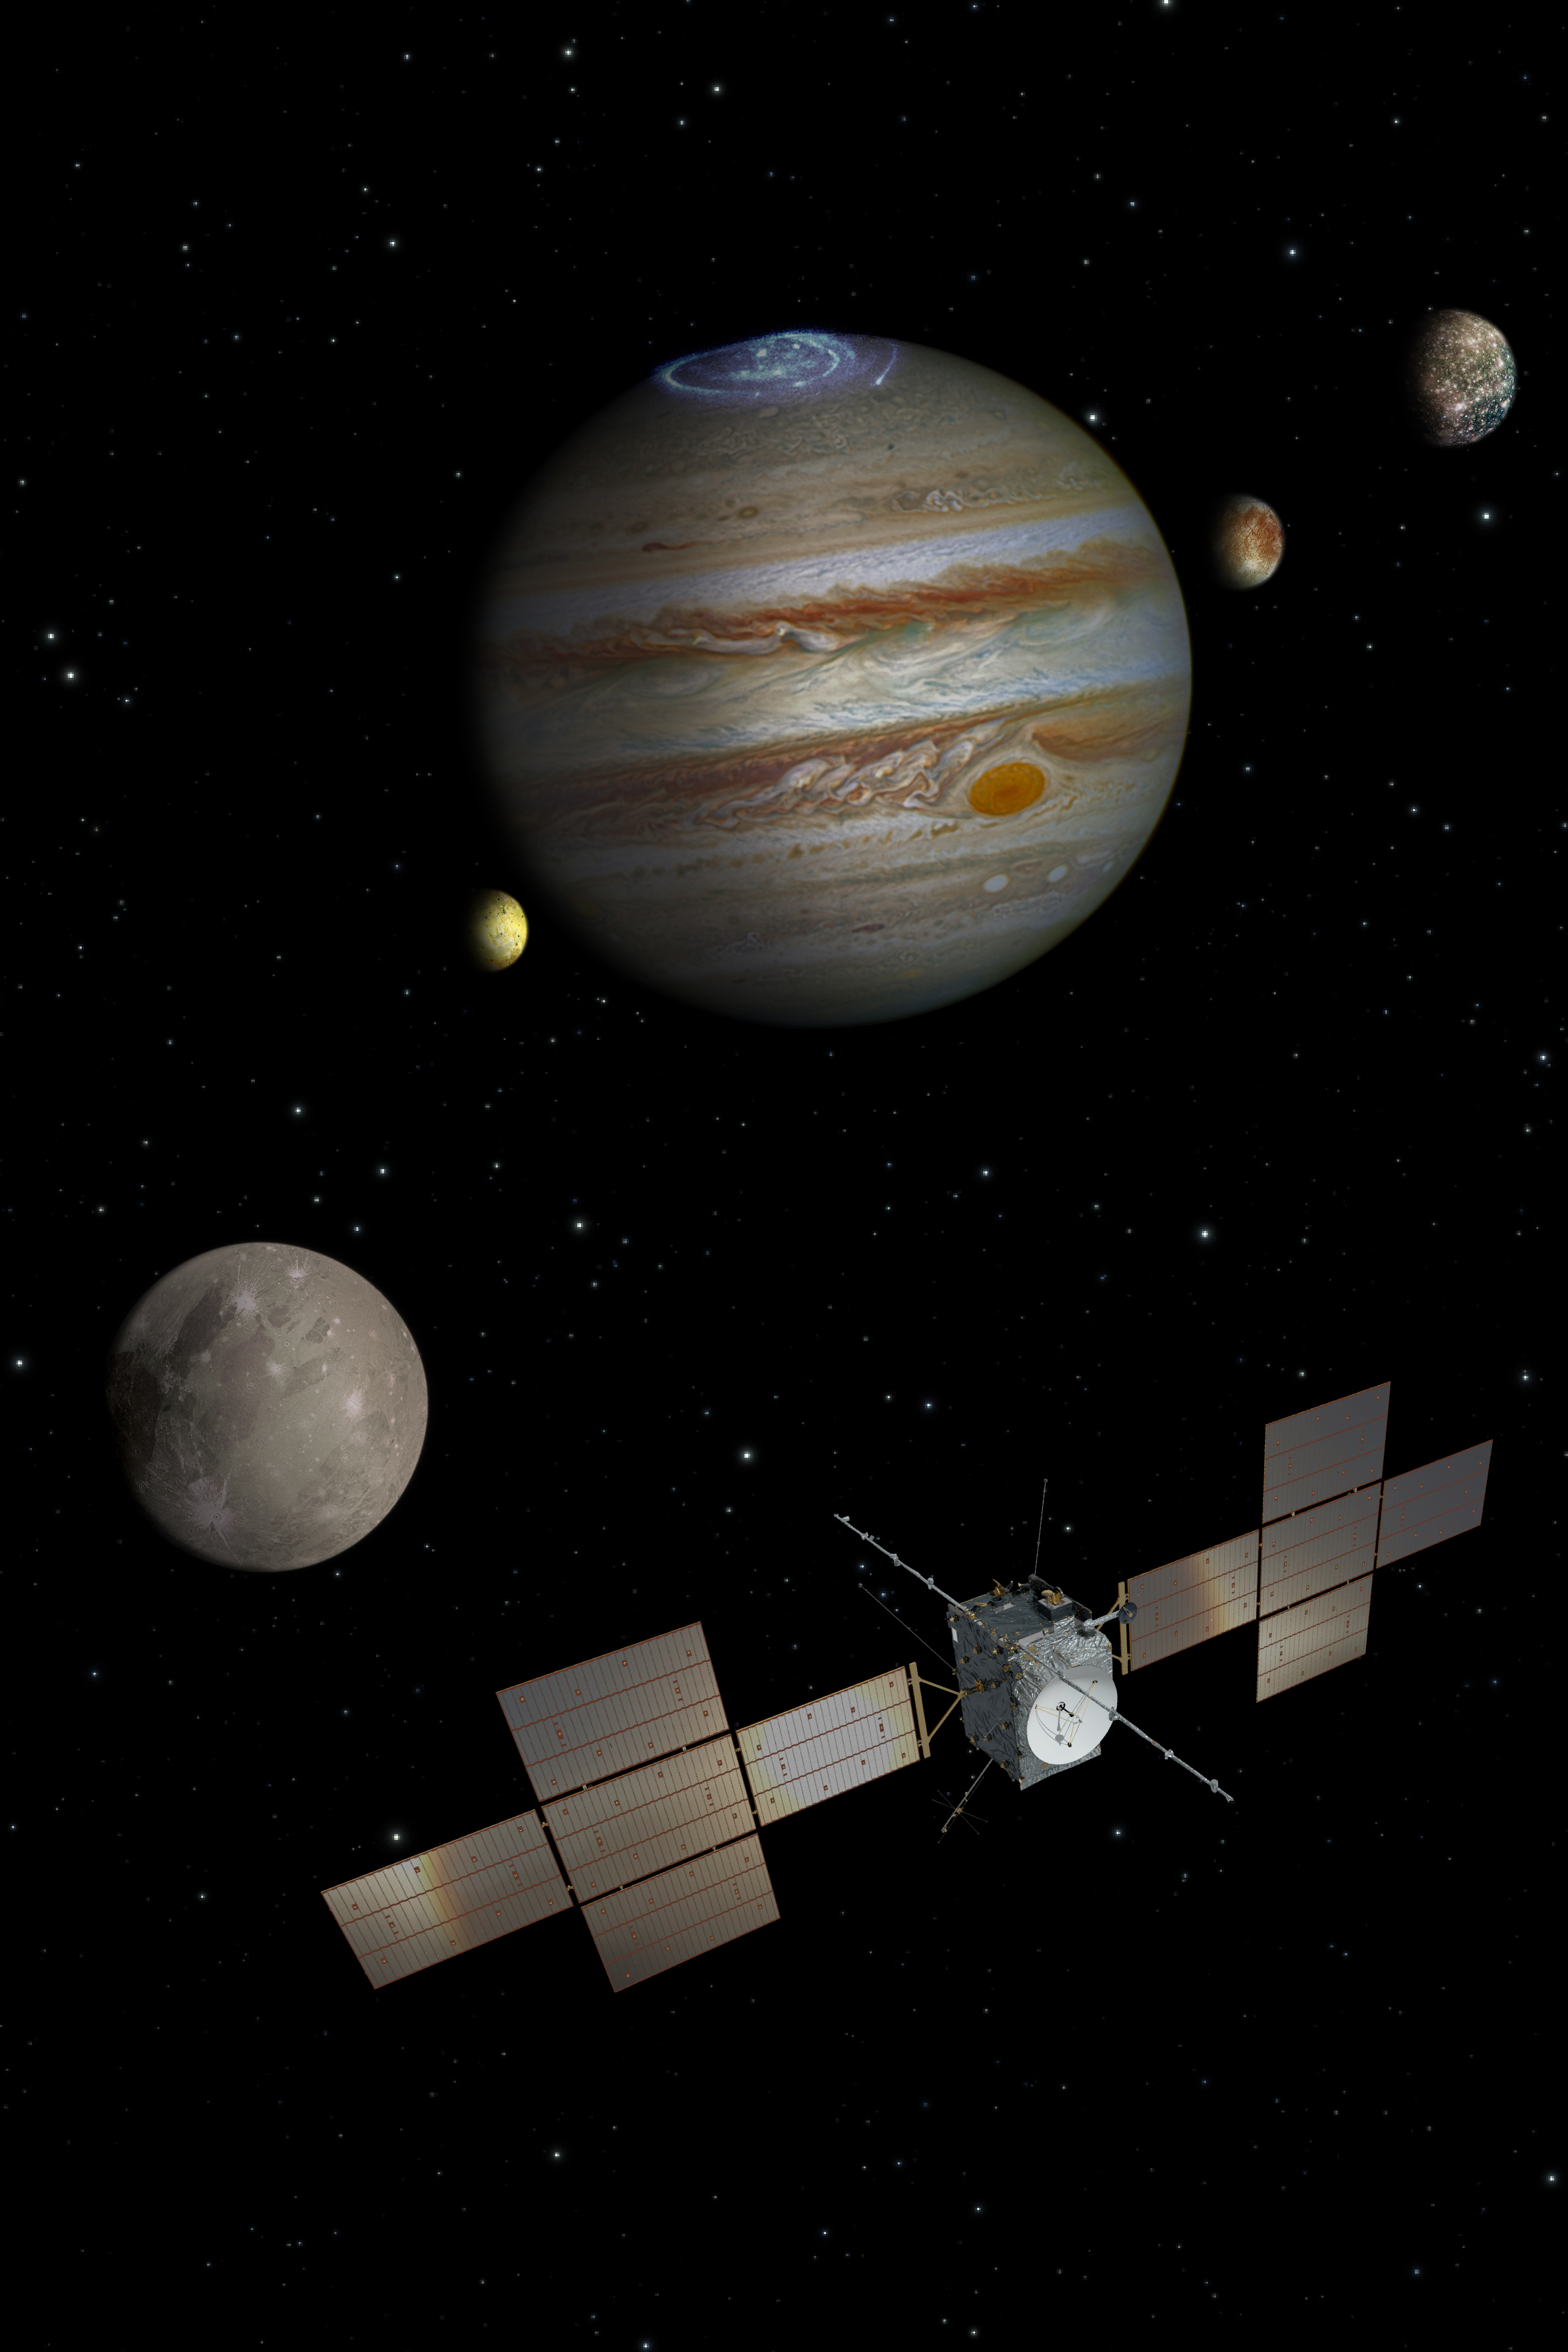 Artistic graphic depicting the ESA JUICE space mission to explore Jupiter and its moons.